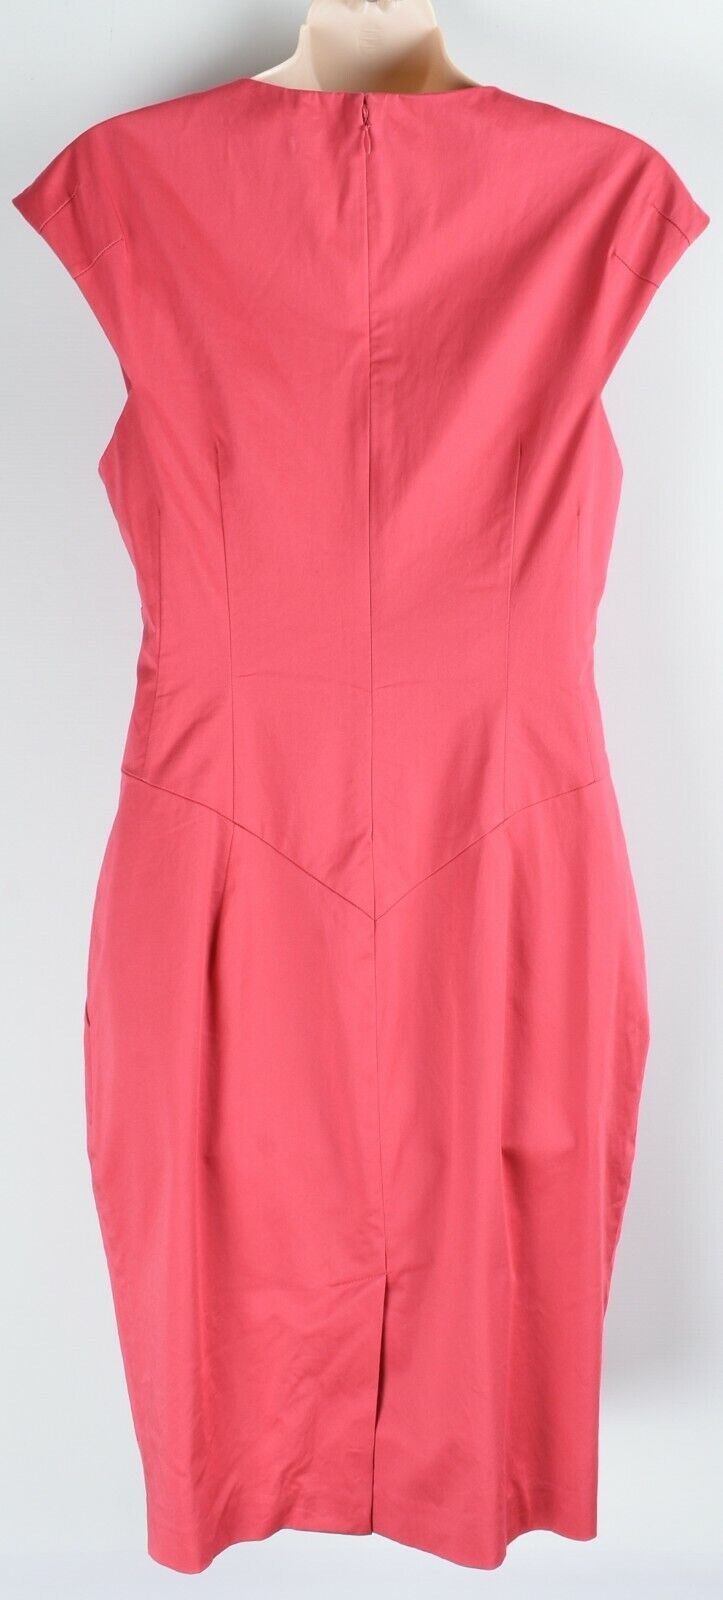 TED BAKER Women's Bow Front Pink Sheath Dress, Ted size 2 / UK 10